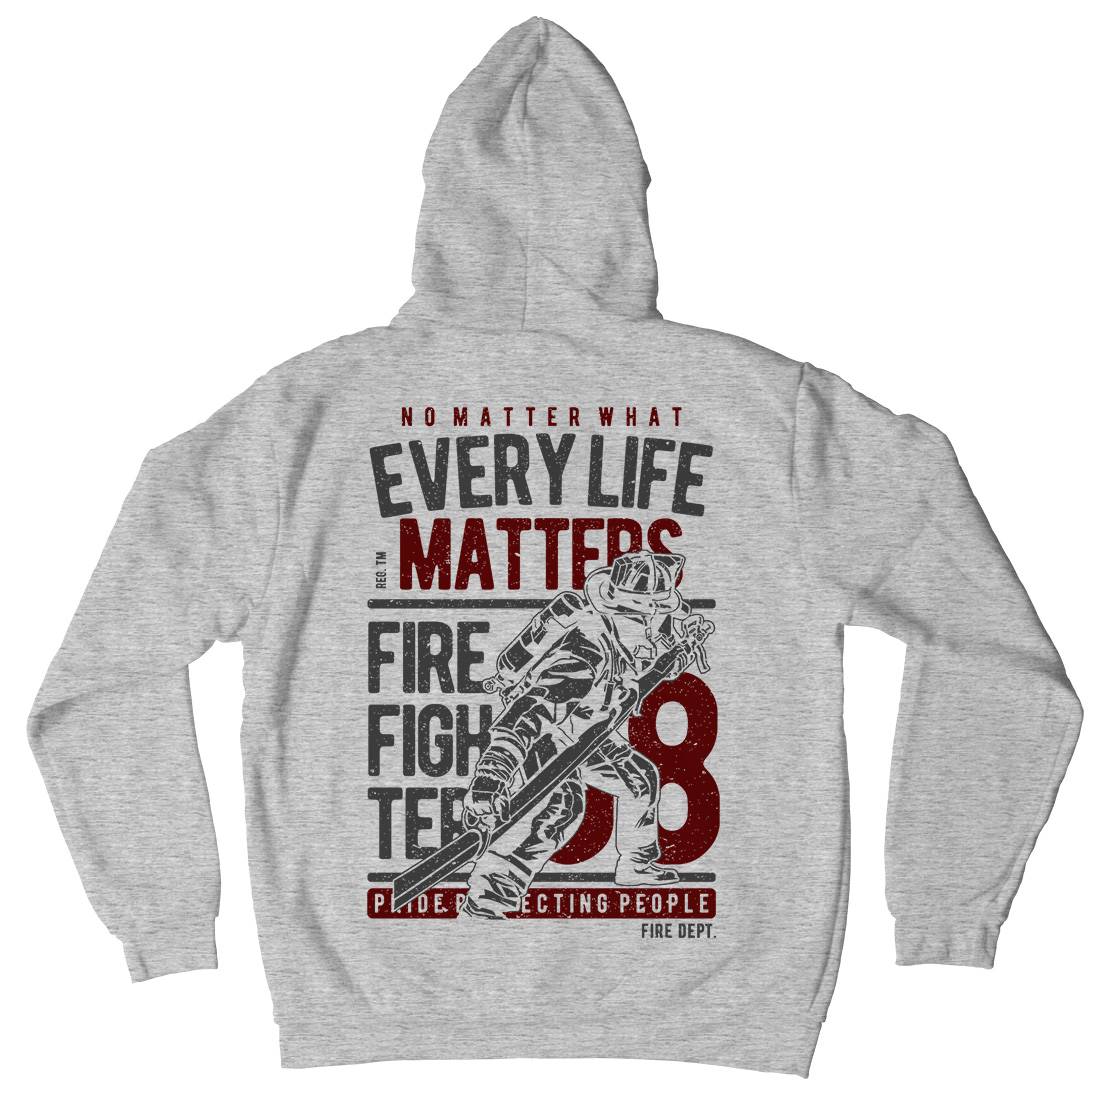 Every Life Matters Kids Crew Neck Hoodie Firefighters A650